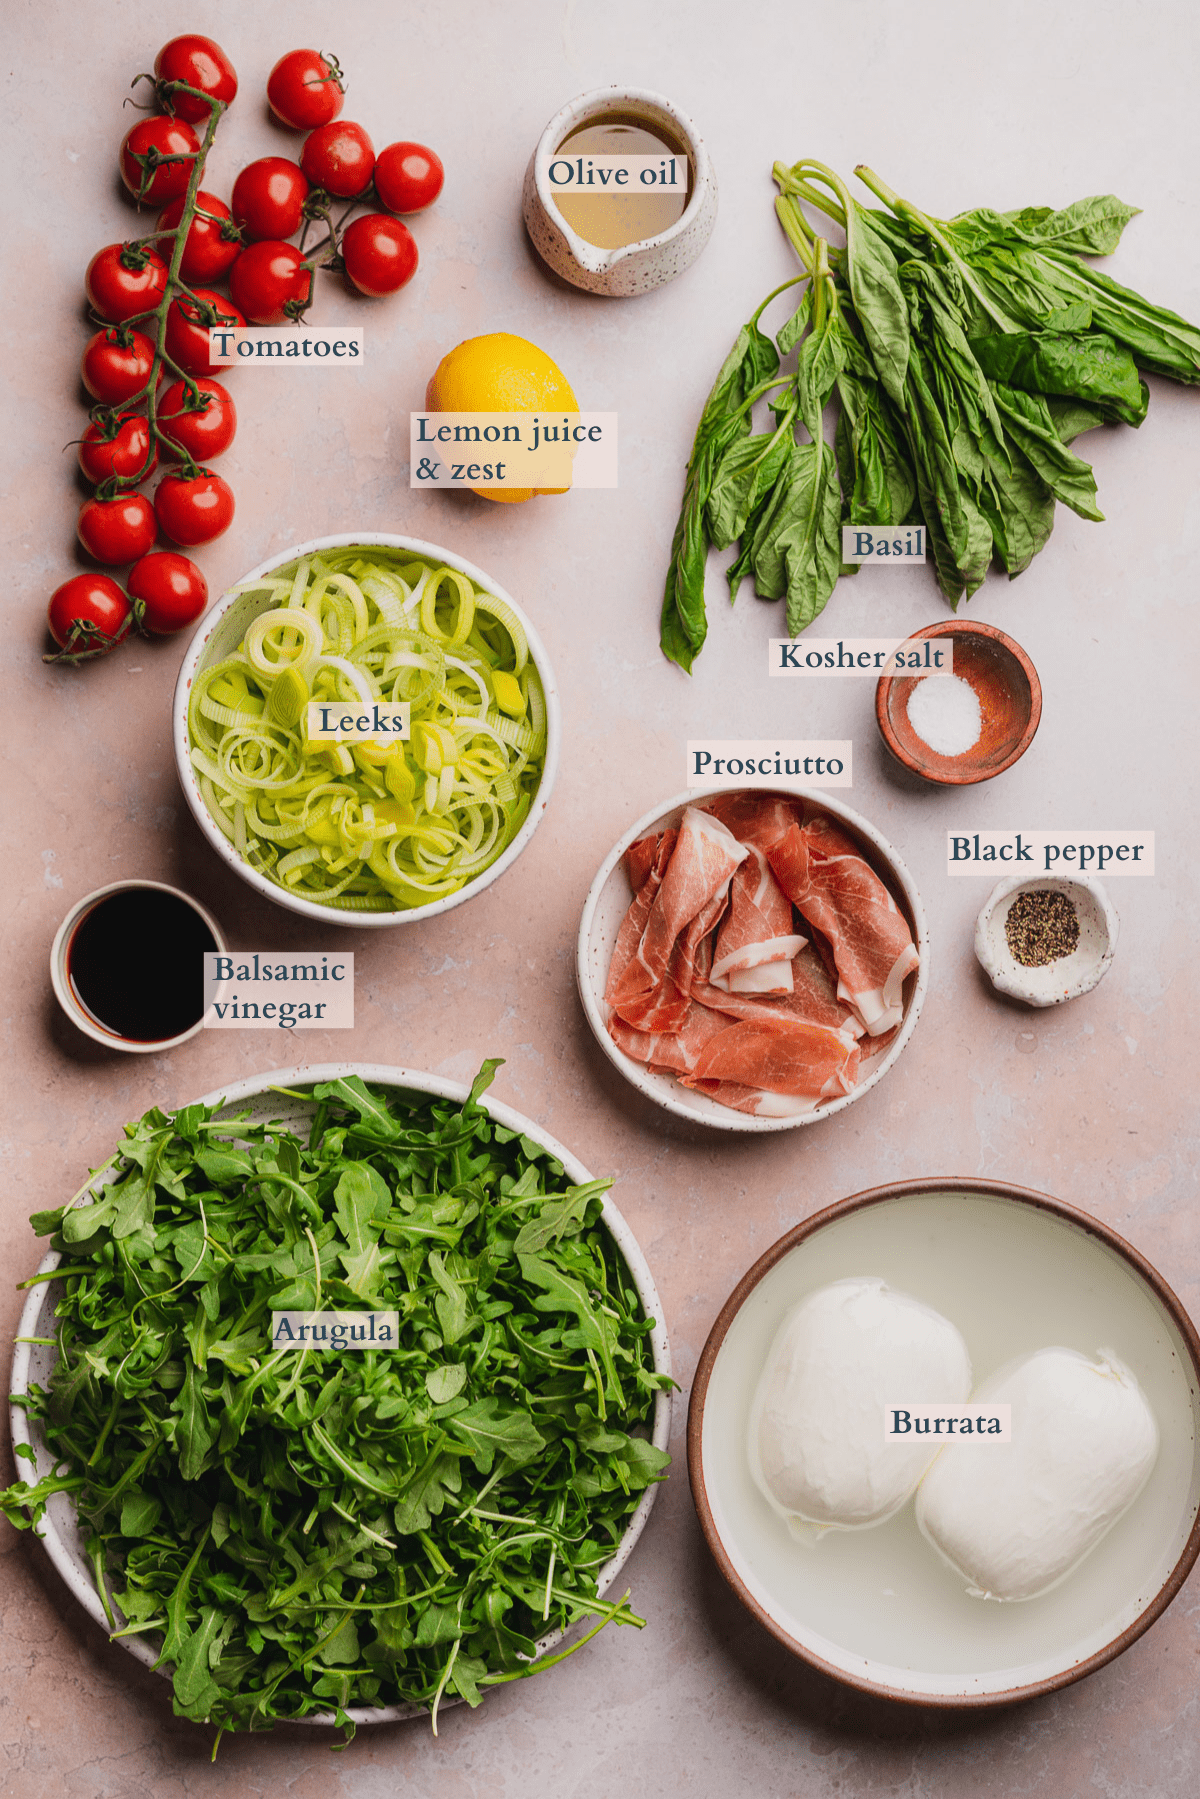 burrata and prosciutto arugula salad ingredients graphic with text to denote different ingredients